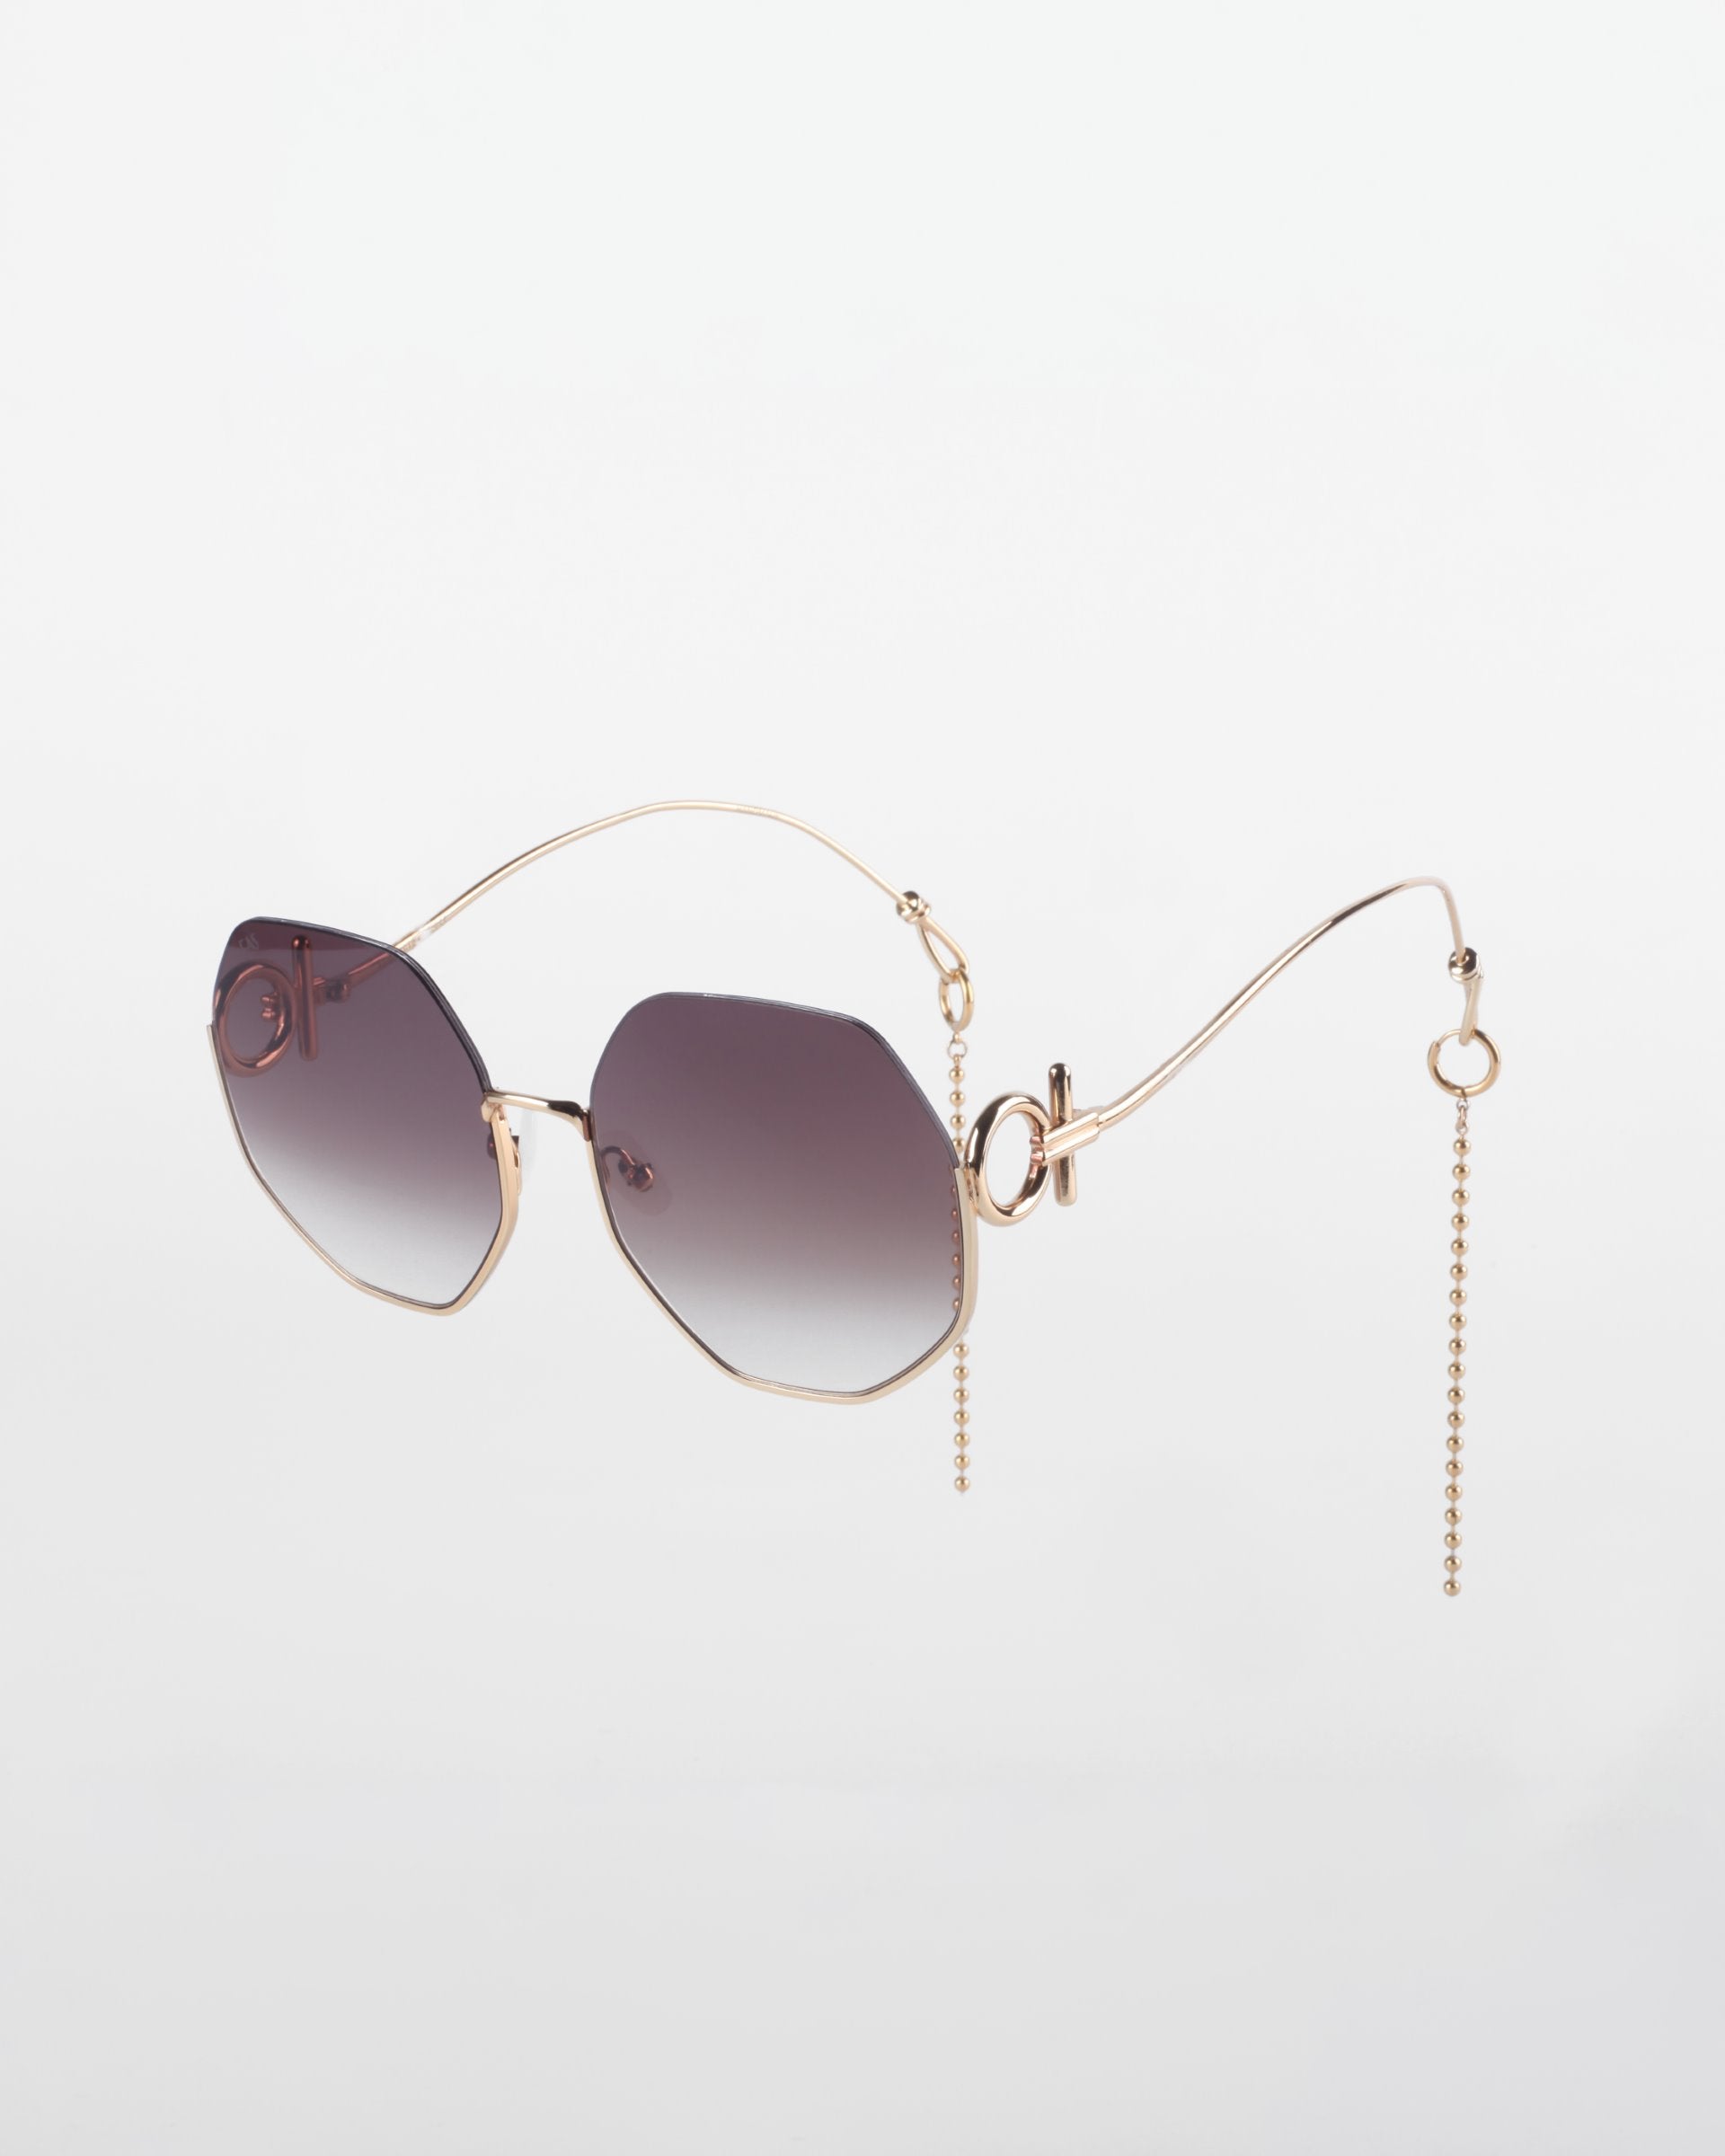 A pair of stylish, oversized Palace sunglasses with gradient lenses and unique, 18-karat gold-plated thin frames by For Art&#39;s Sake®. The temples have an elegant, curved design, with a chain dangling from the end of each temple. This Limited Edition accessory offers a chic and sophisticated look against a white background.